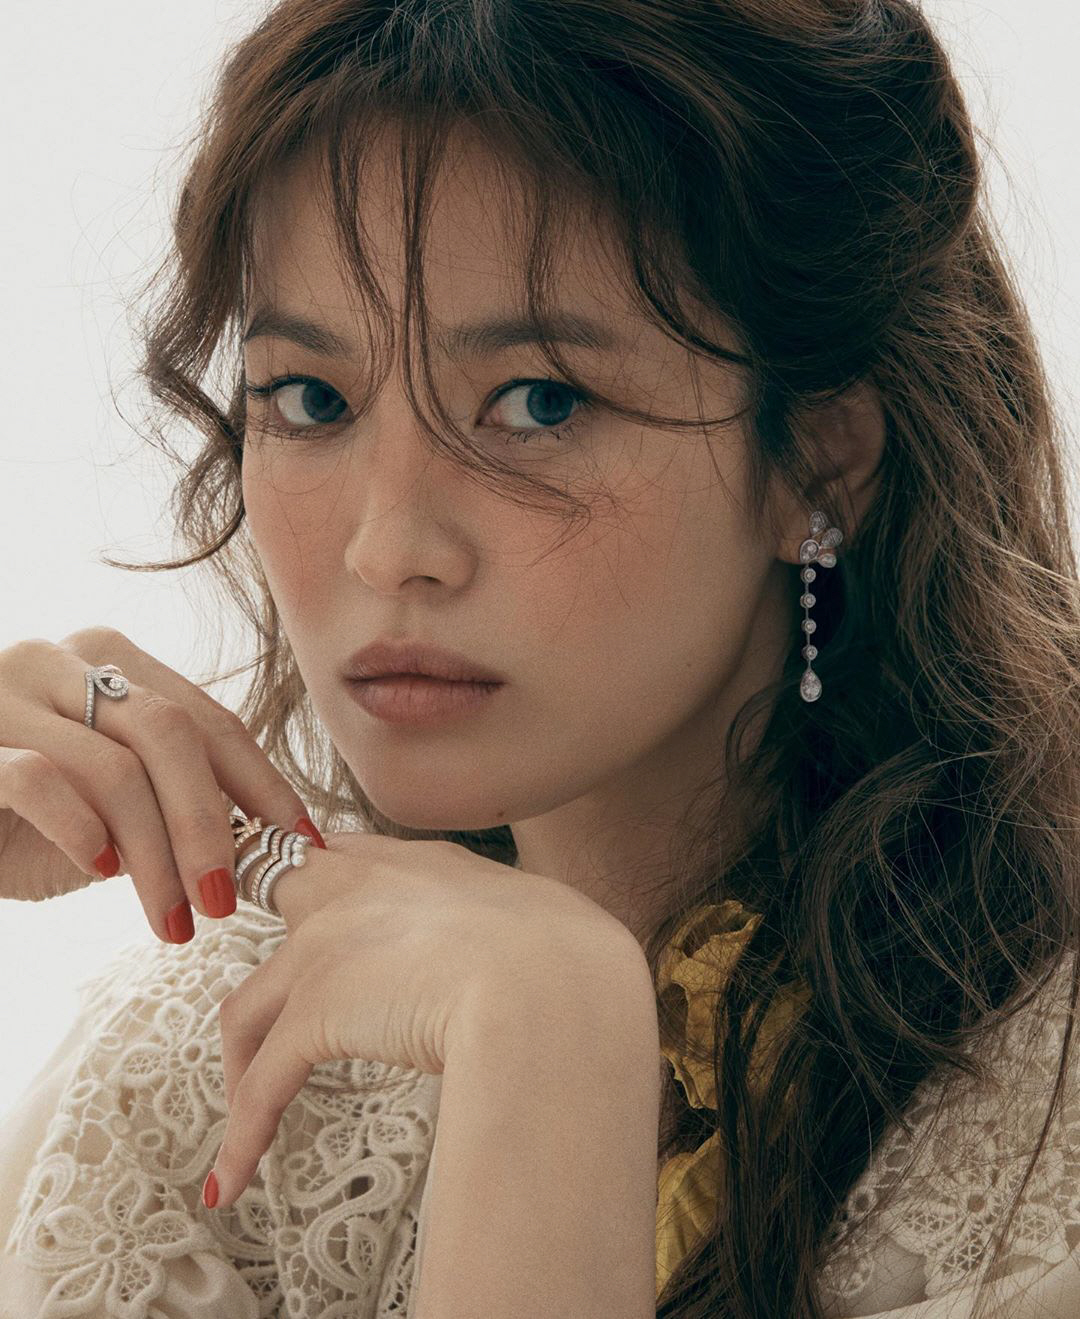 Song Hye-kyo is 29, his Instagram on the fashion magazine Elle Singapore panel 5 June cover and pictorial to the public. Pictorial belongs to Song Hye-kyo is matted seemed natural long wave hair and exotic feel to highlight the makeup and colored lenses with a mysterious and dreamy look was. Also seemed nonchalant expression from the eyes and the pose until the digest and the craftsmanshipof the side exposed. Elle Singapore side official via SNS Song Hye-kyo and The Interview help the public. Song Hye-kyo is an Interview from success to asked I was very lucky, I think. When a great work was able to participate, and work well with many people who loved the game of today I have a reason to. Very grateful,he said. Meanwhile Song Hye-kyo is a sequel to consideration. Recently, the Korean Provisional Government be established to meet Professor SEO Gyeong-deok and Chongqing, China interim government in the Korean guide 1 million donated.